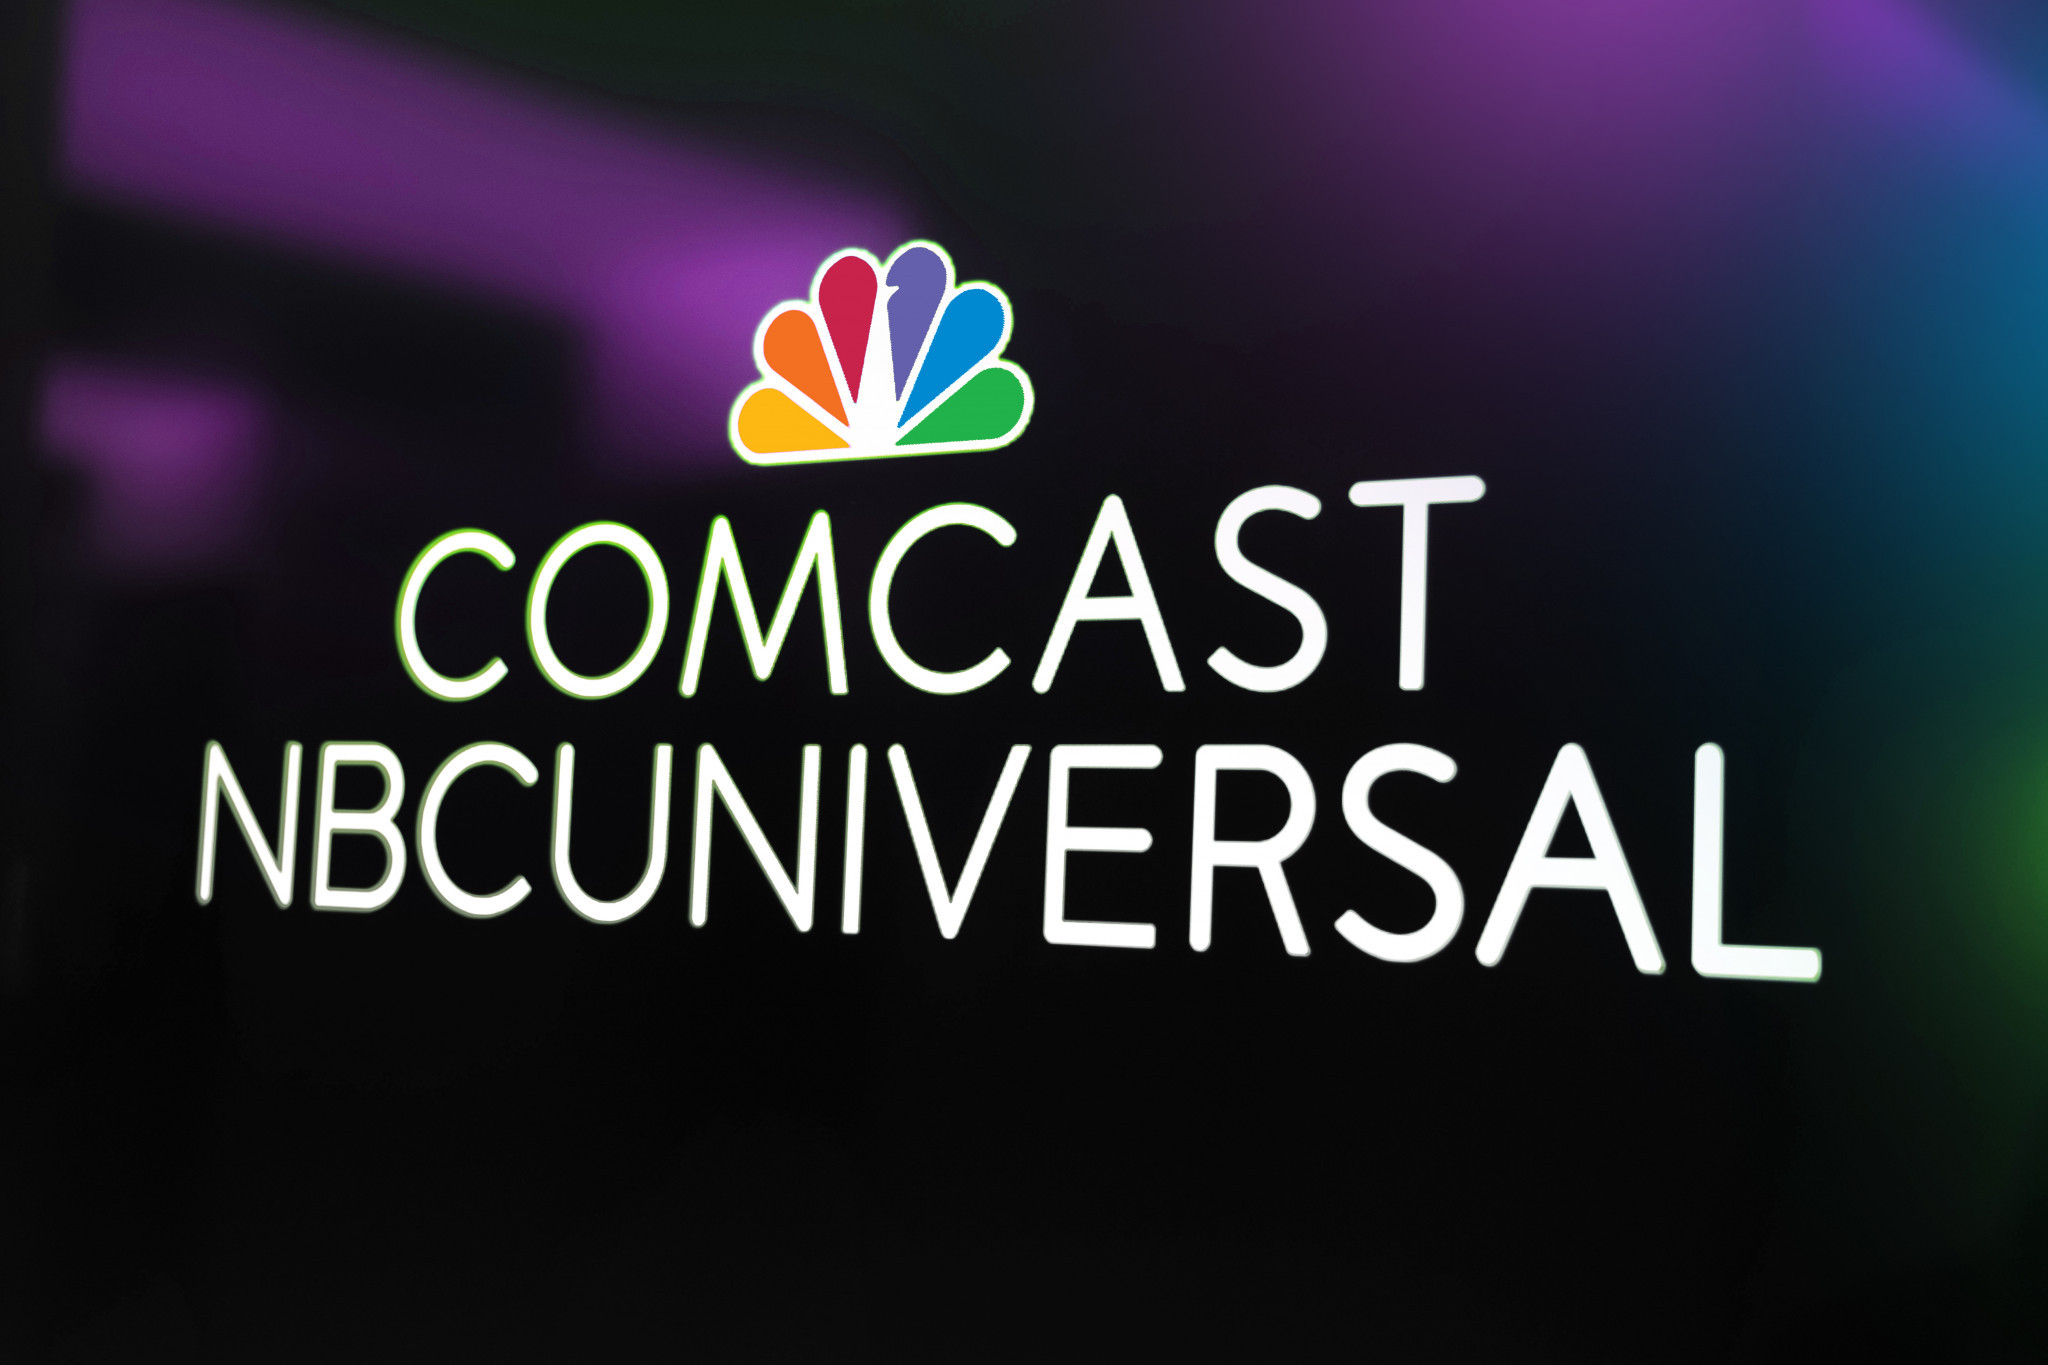 Tokyo 2020 generated $1.76 billion in revenue for NBCUniversal in its third quarter according to financial results published by Comcast ©Getty Images 